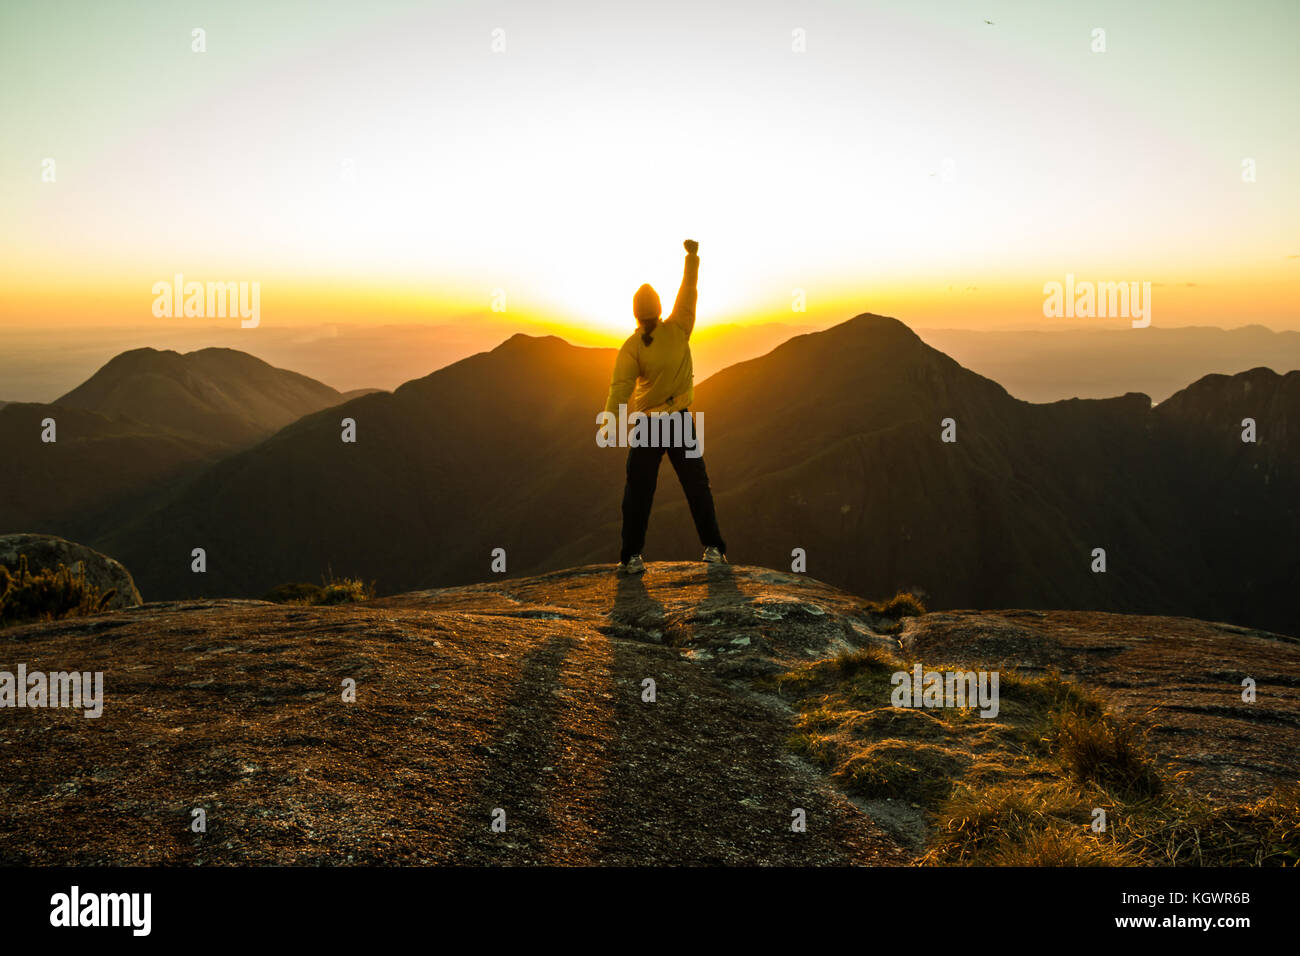 Man celebrating success on top of a mountain with one arm Raised and Hands Closed Stock Photo